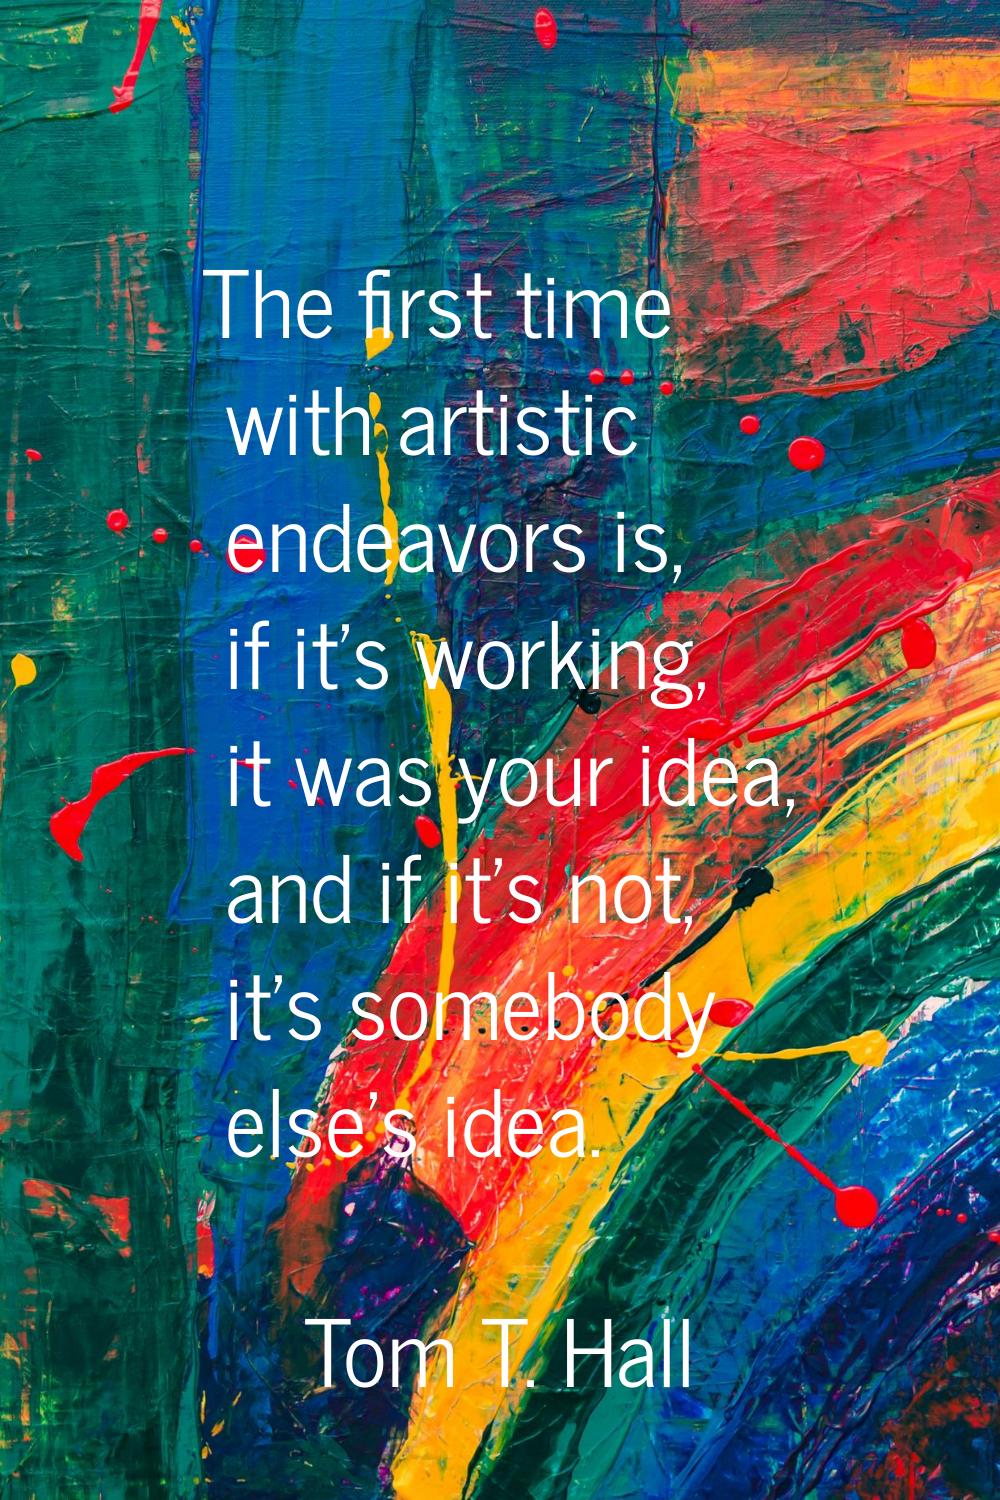 The first time with artistic endeavors is, if it's working, it was your idea, and if it's not, it's